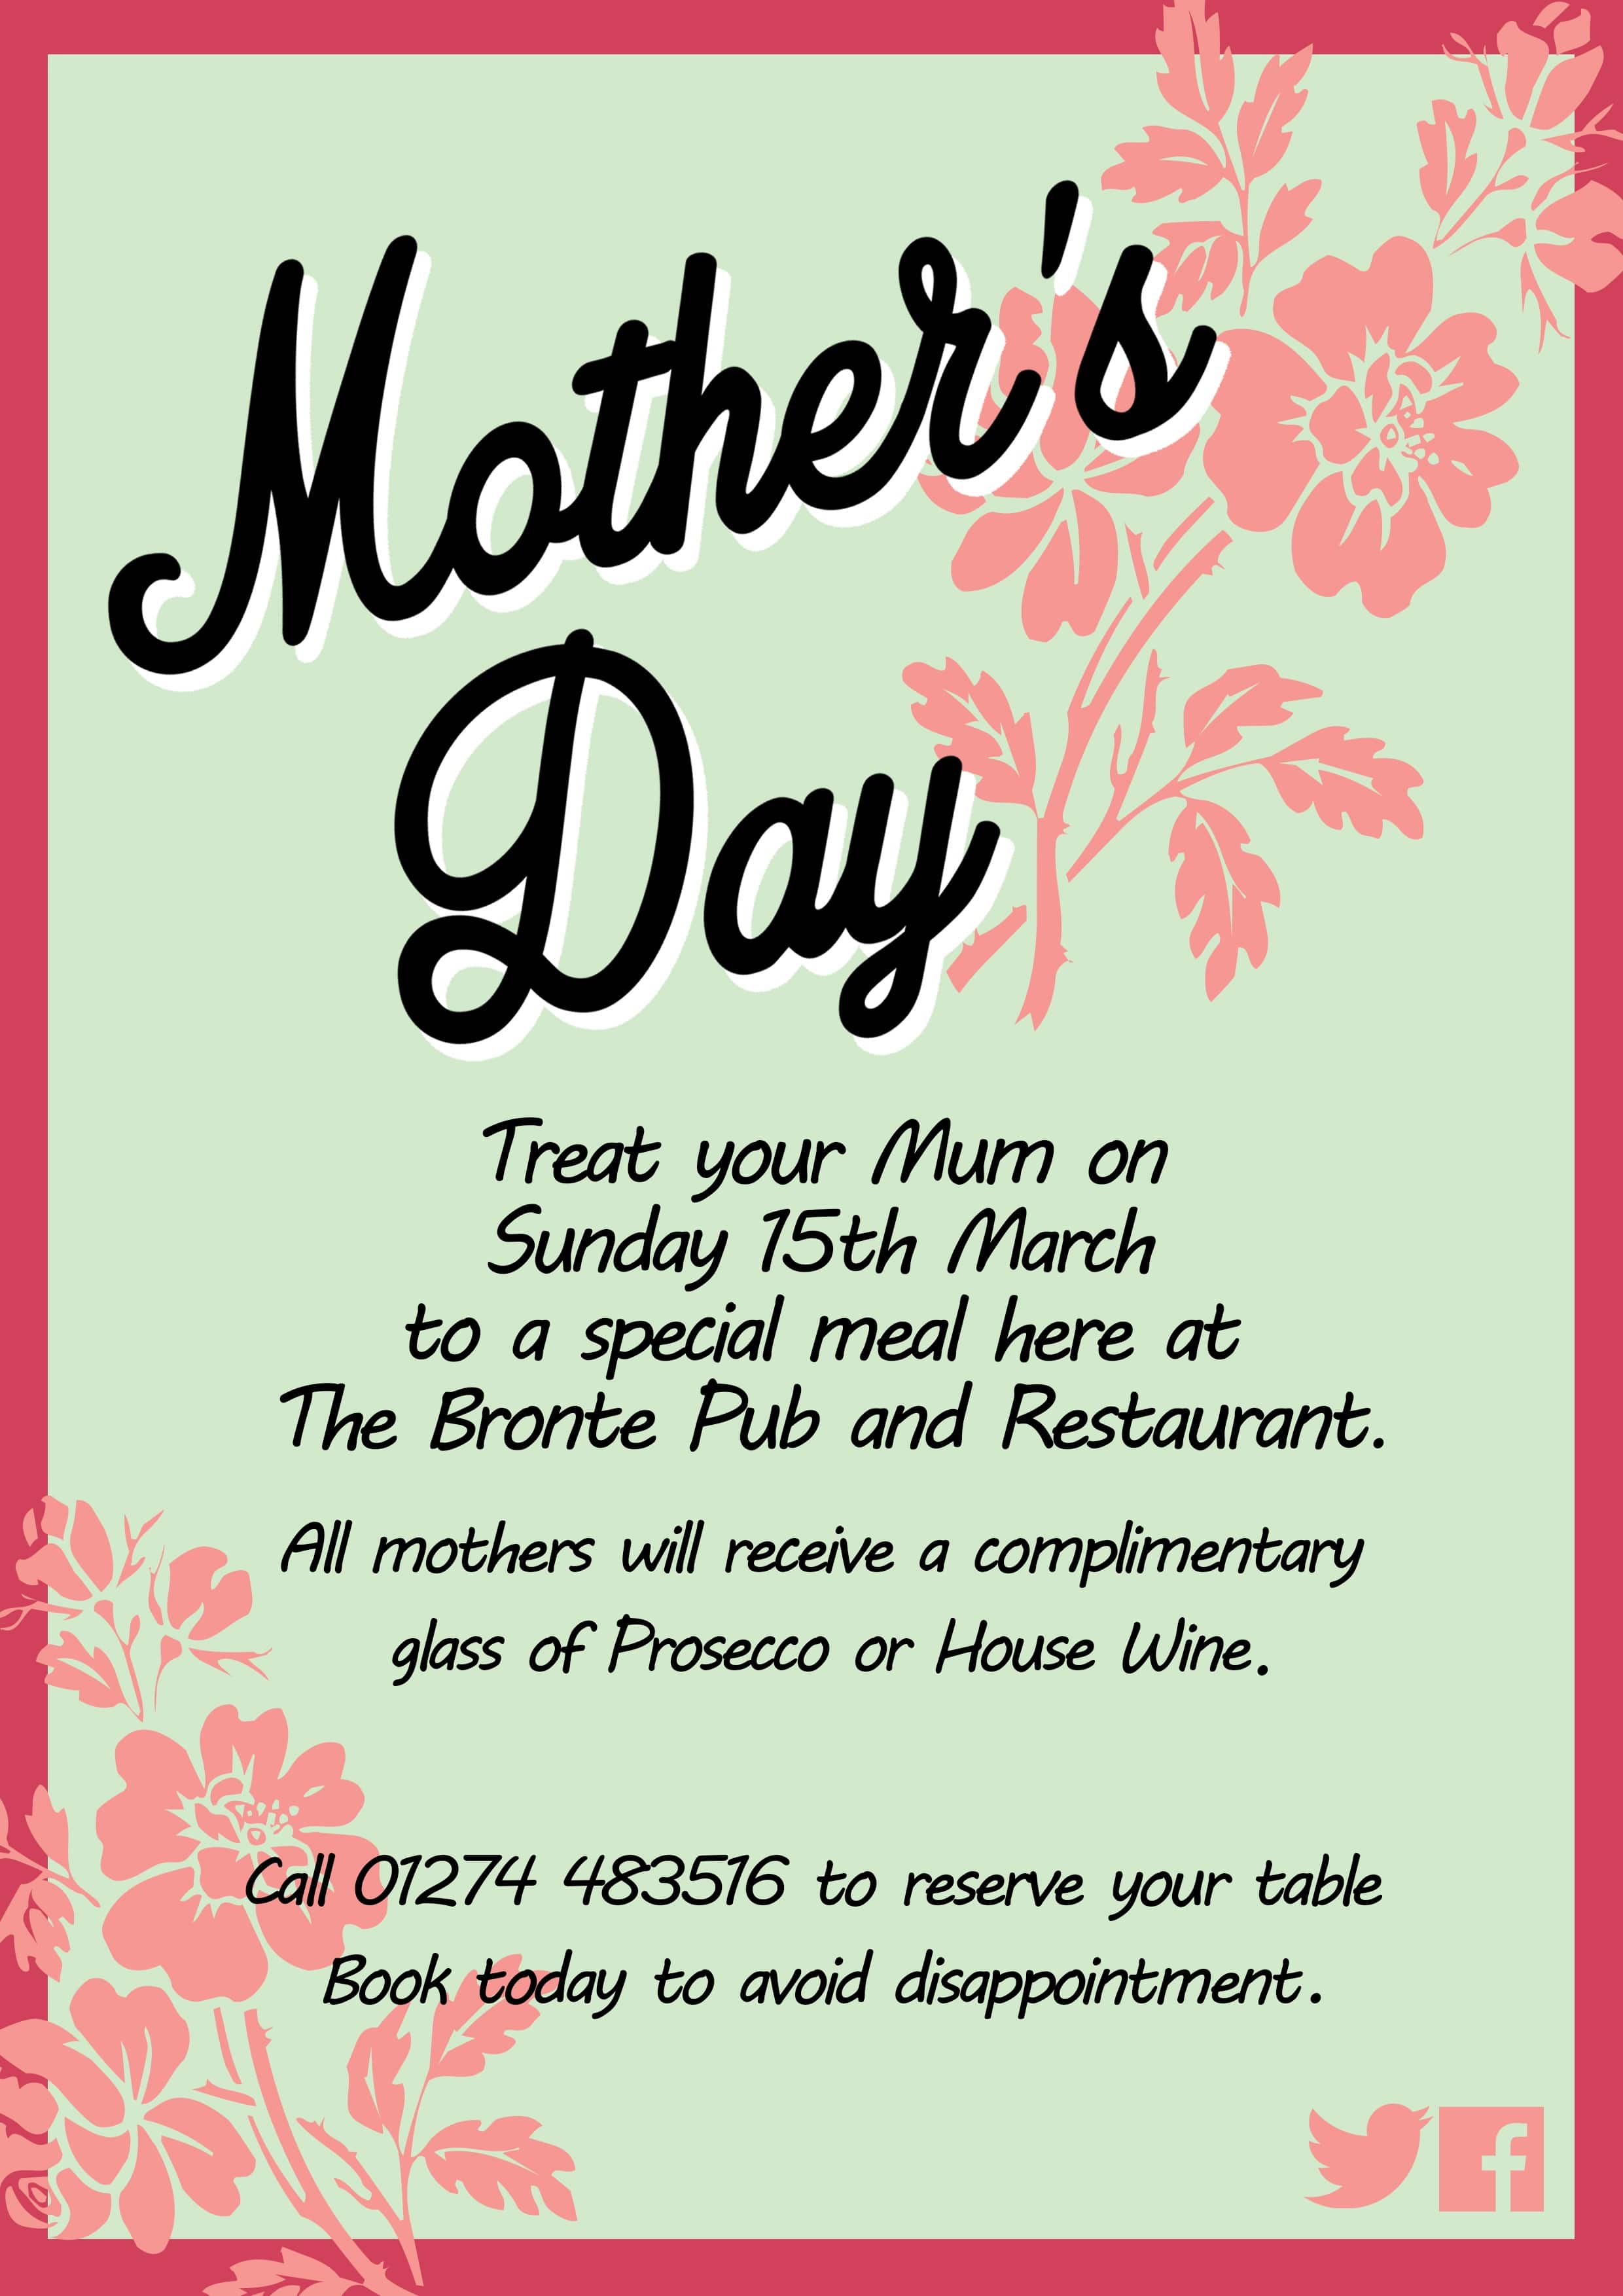 Mother's Day Poster 